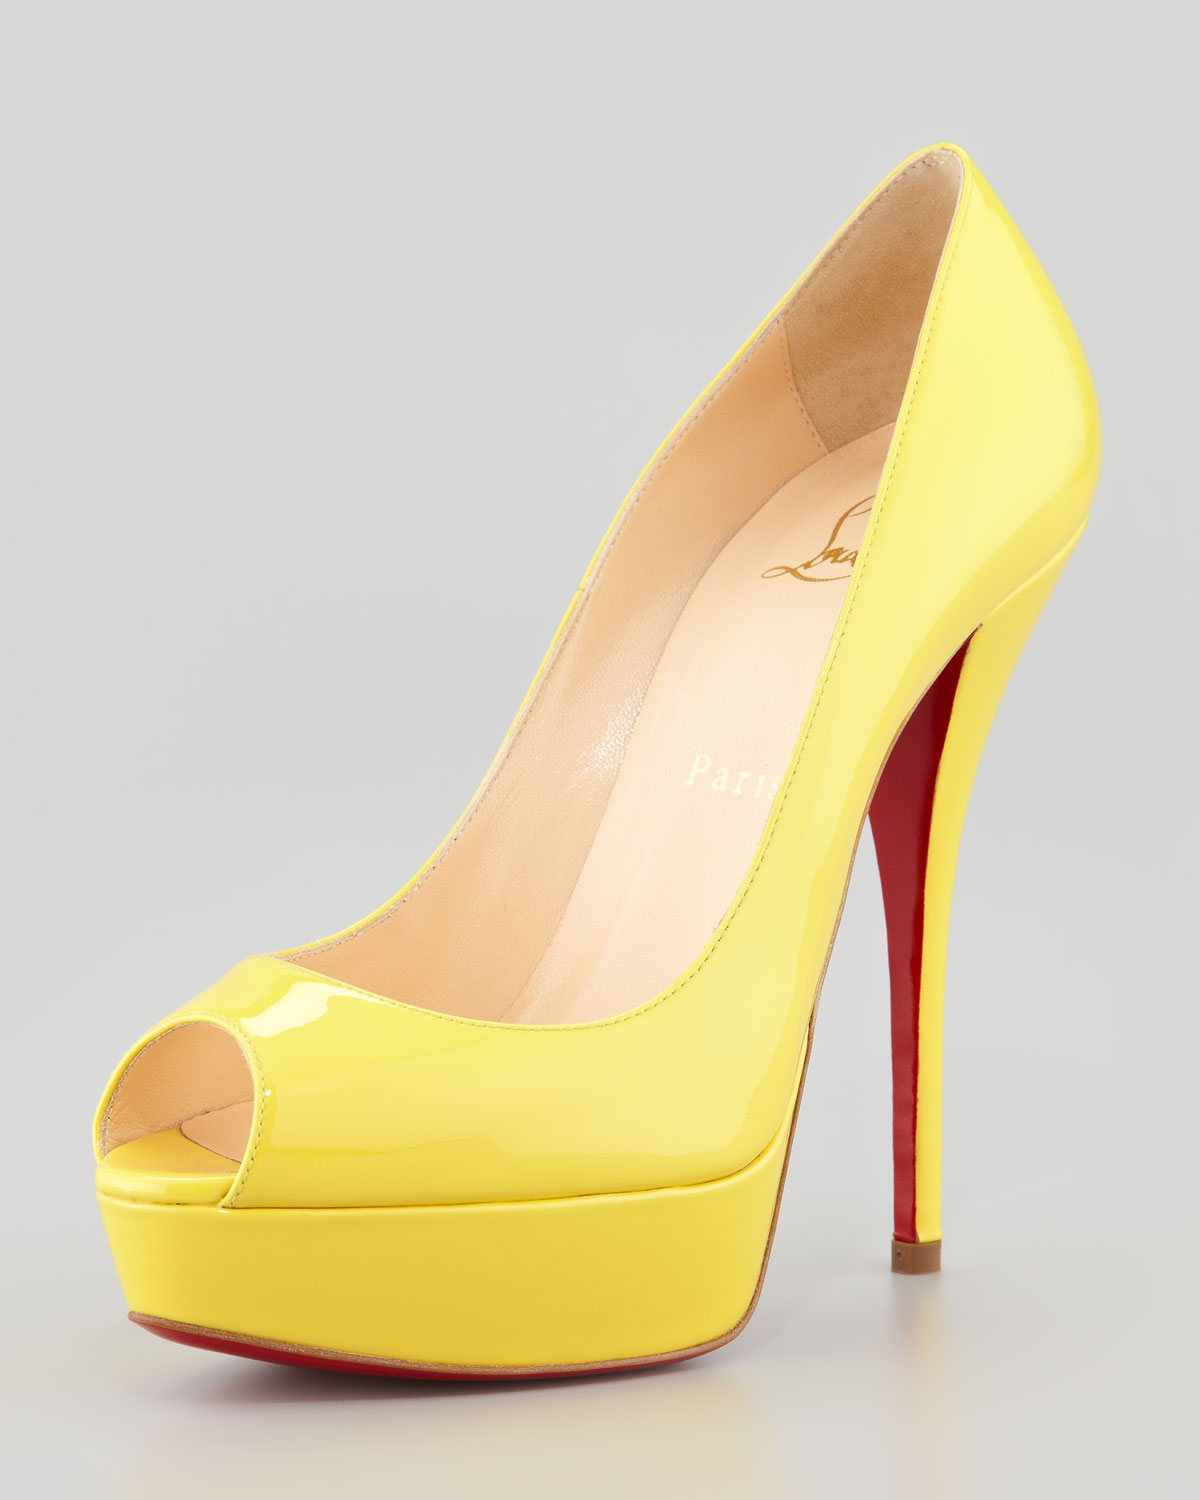 yellow red bottom shoes